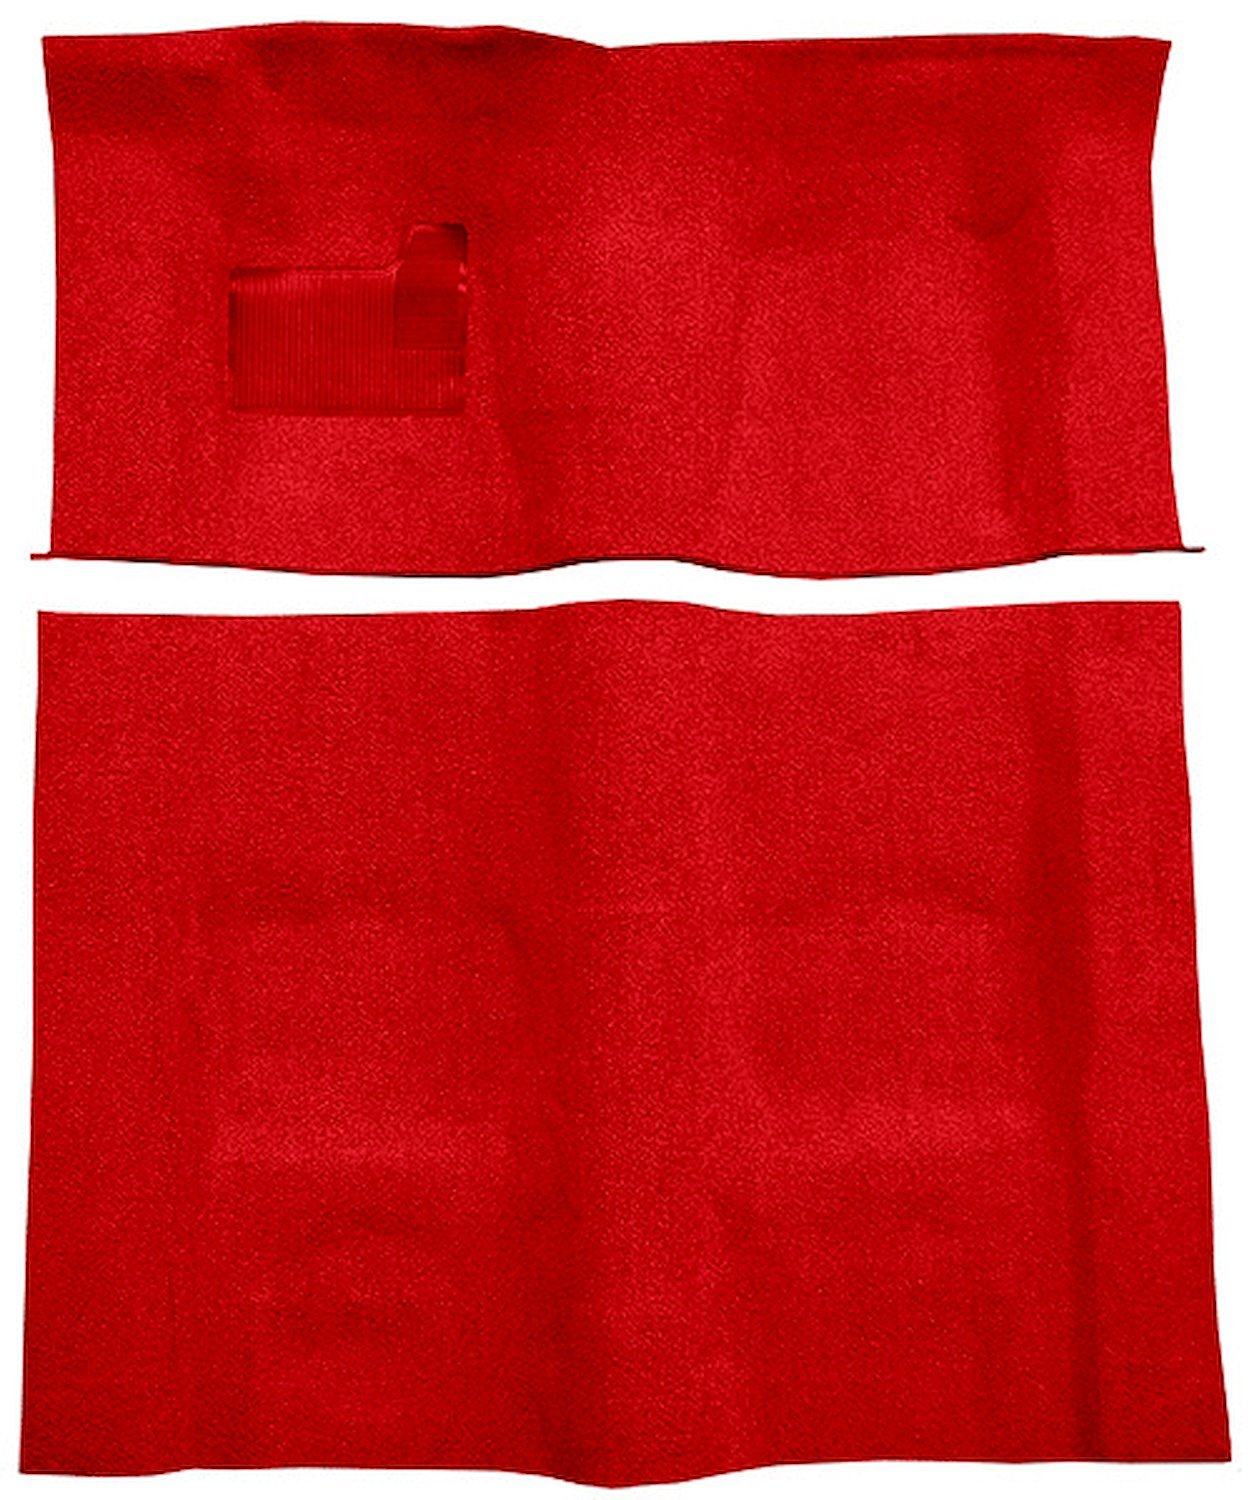 Molded Cut Pile Carpet for 1974-1975 Chevrolet Camaro, Pontiac Firebird [Mass Backing, Automatic Transmission, Flame Red]